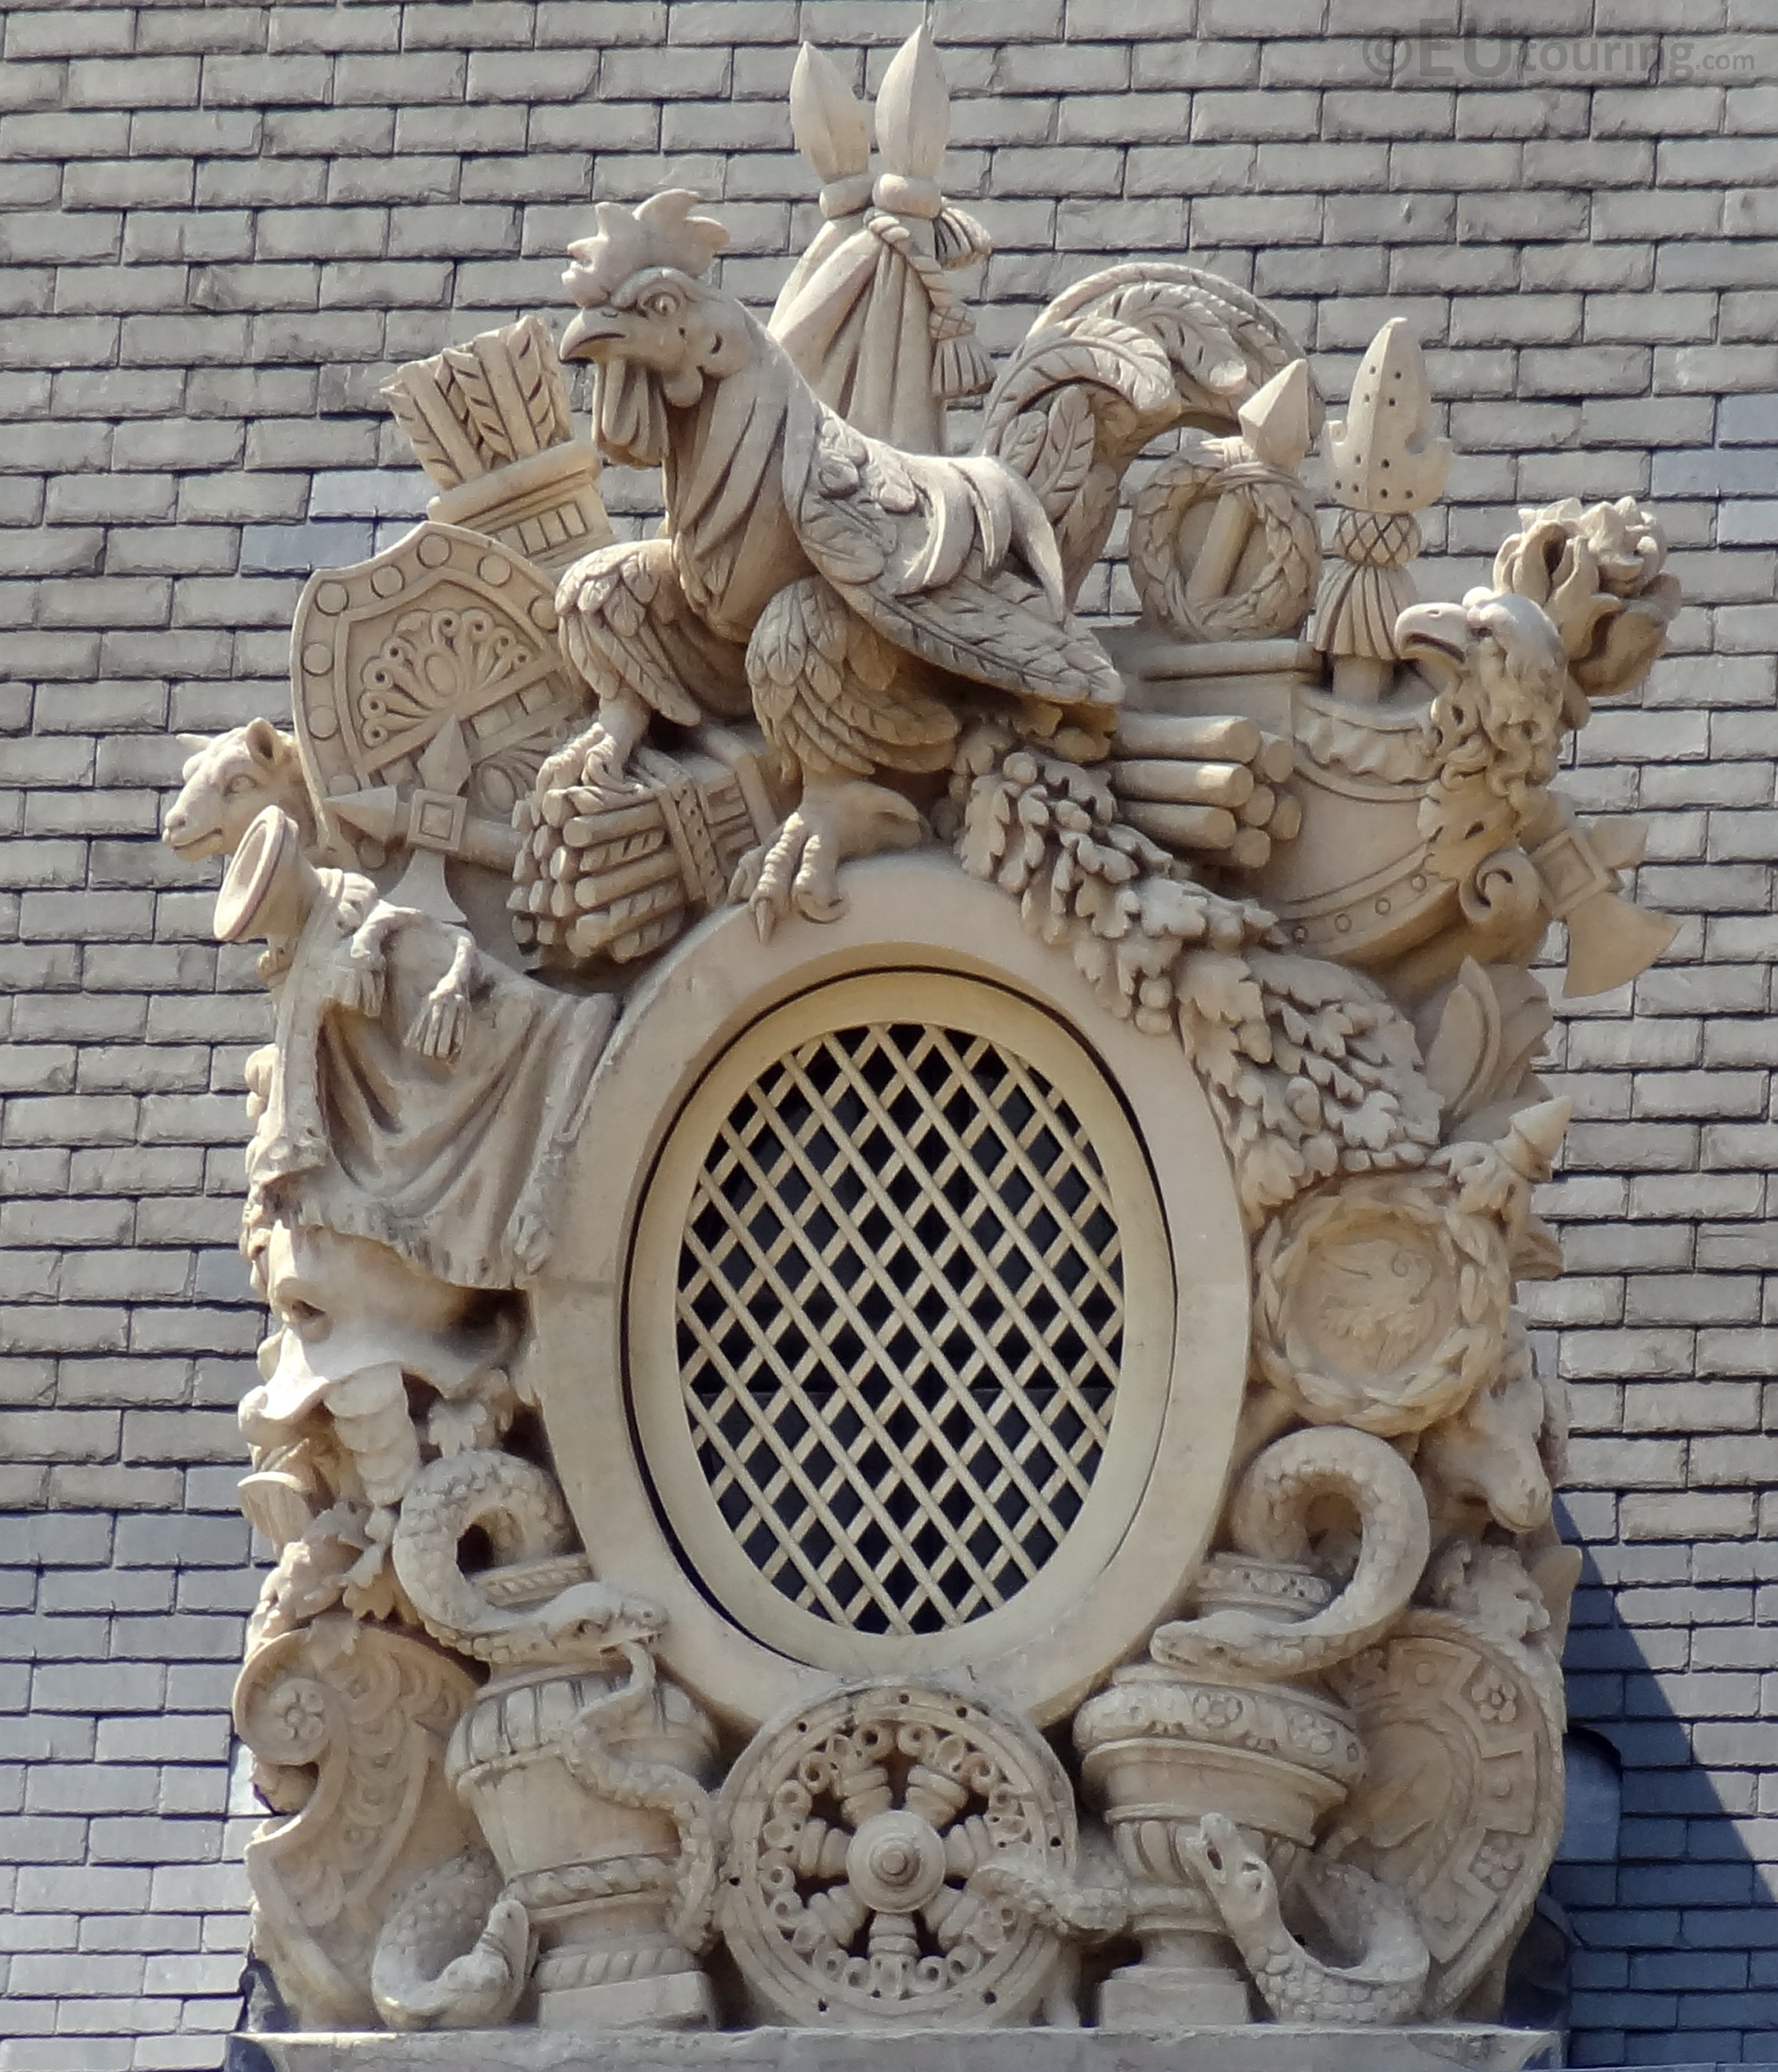 Stone sculptures on the roof